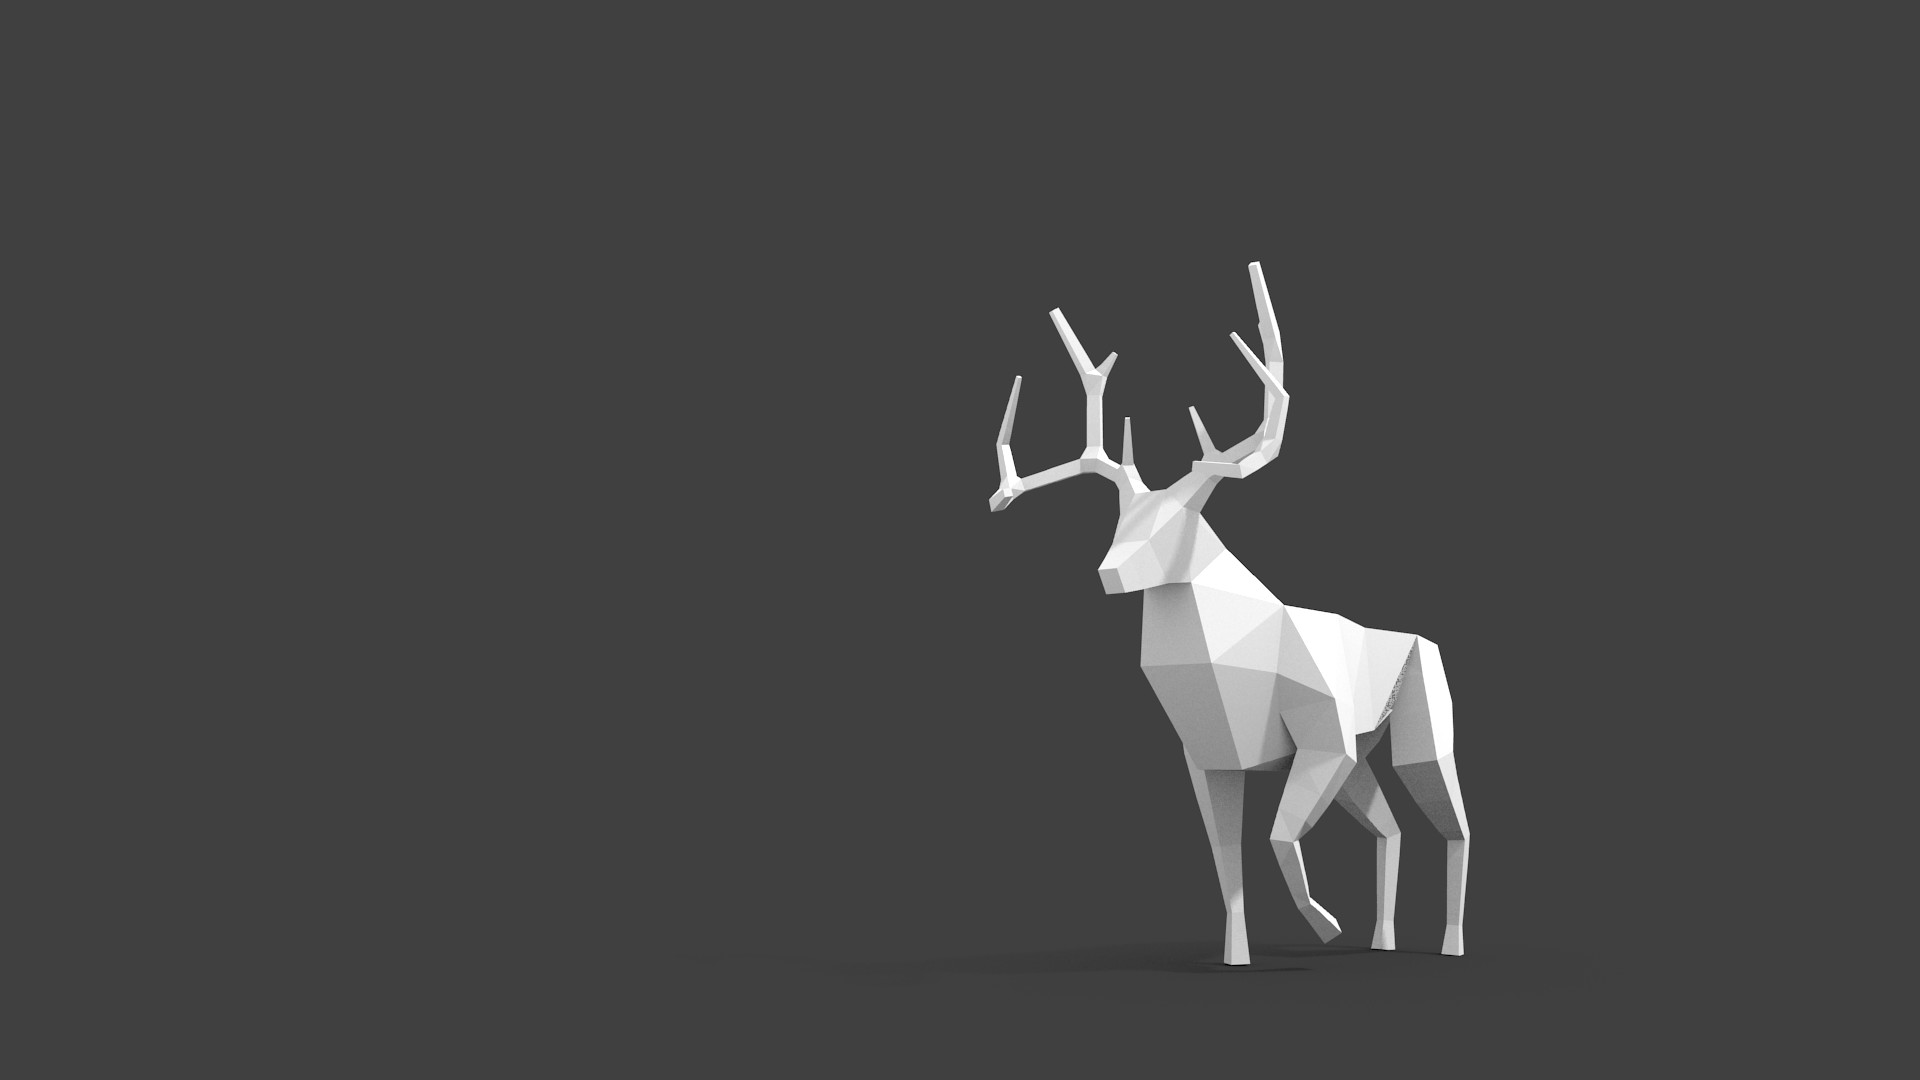 1920x1080 Deer Wallpaper, Low Poly, Game Art, Experiment, Modeling, Illustration,  Brushes, Google Search, House